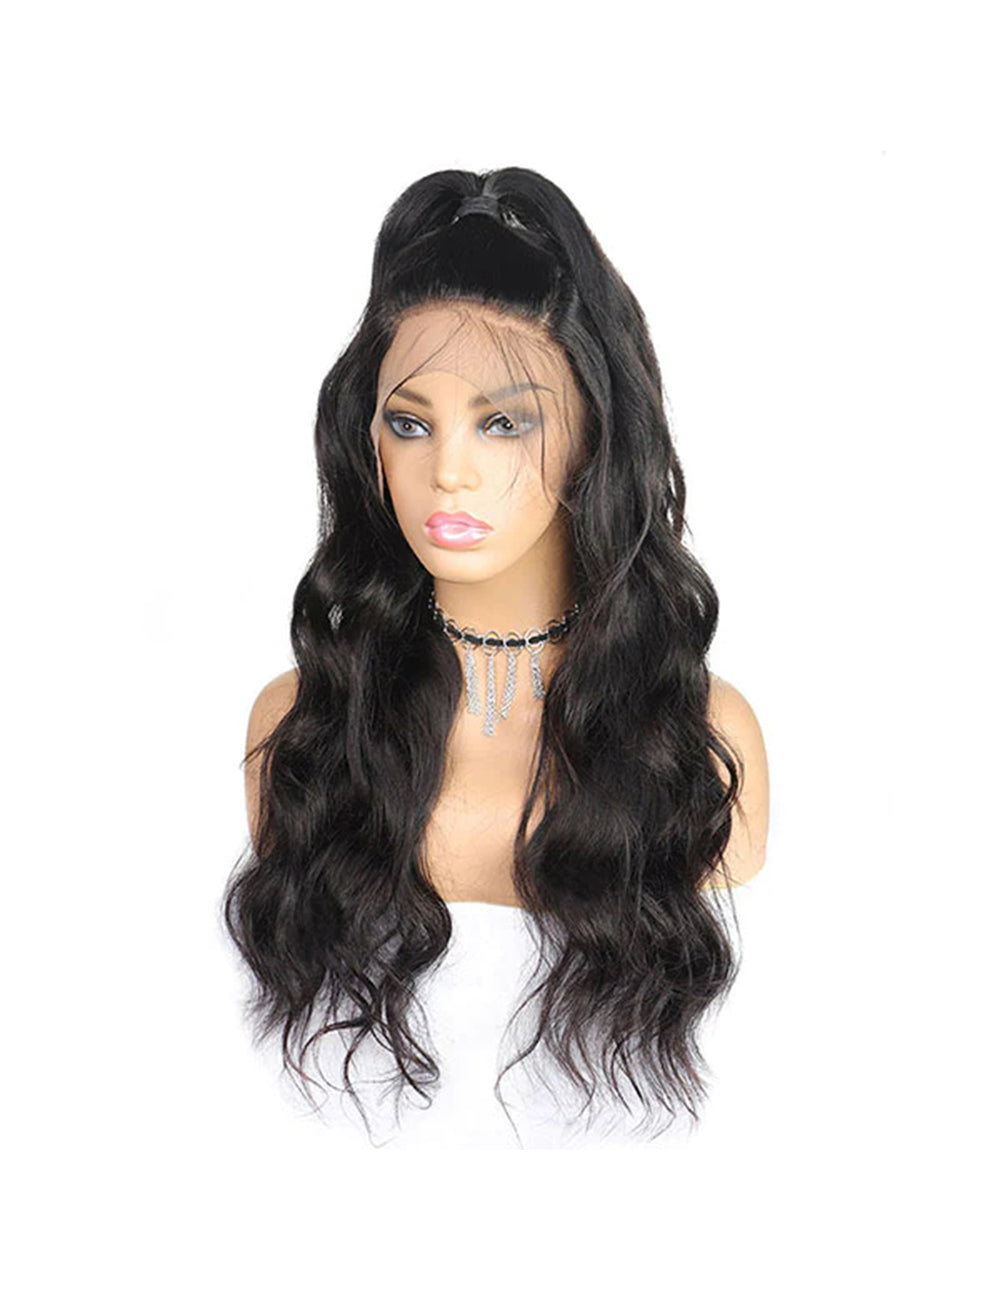 Body Wave Lace Front Wig Indian Human Hair Wig 13x4 Lace Frontal Wigs 30Inch Hair